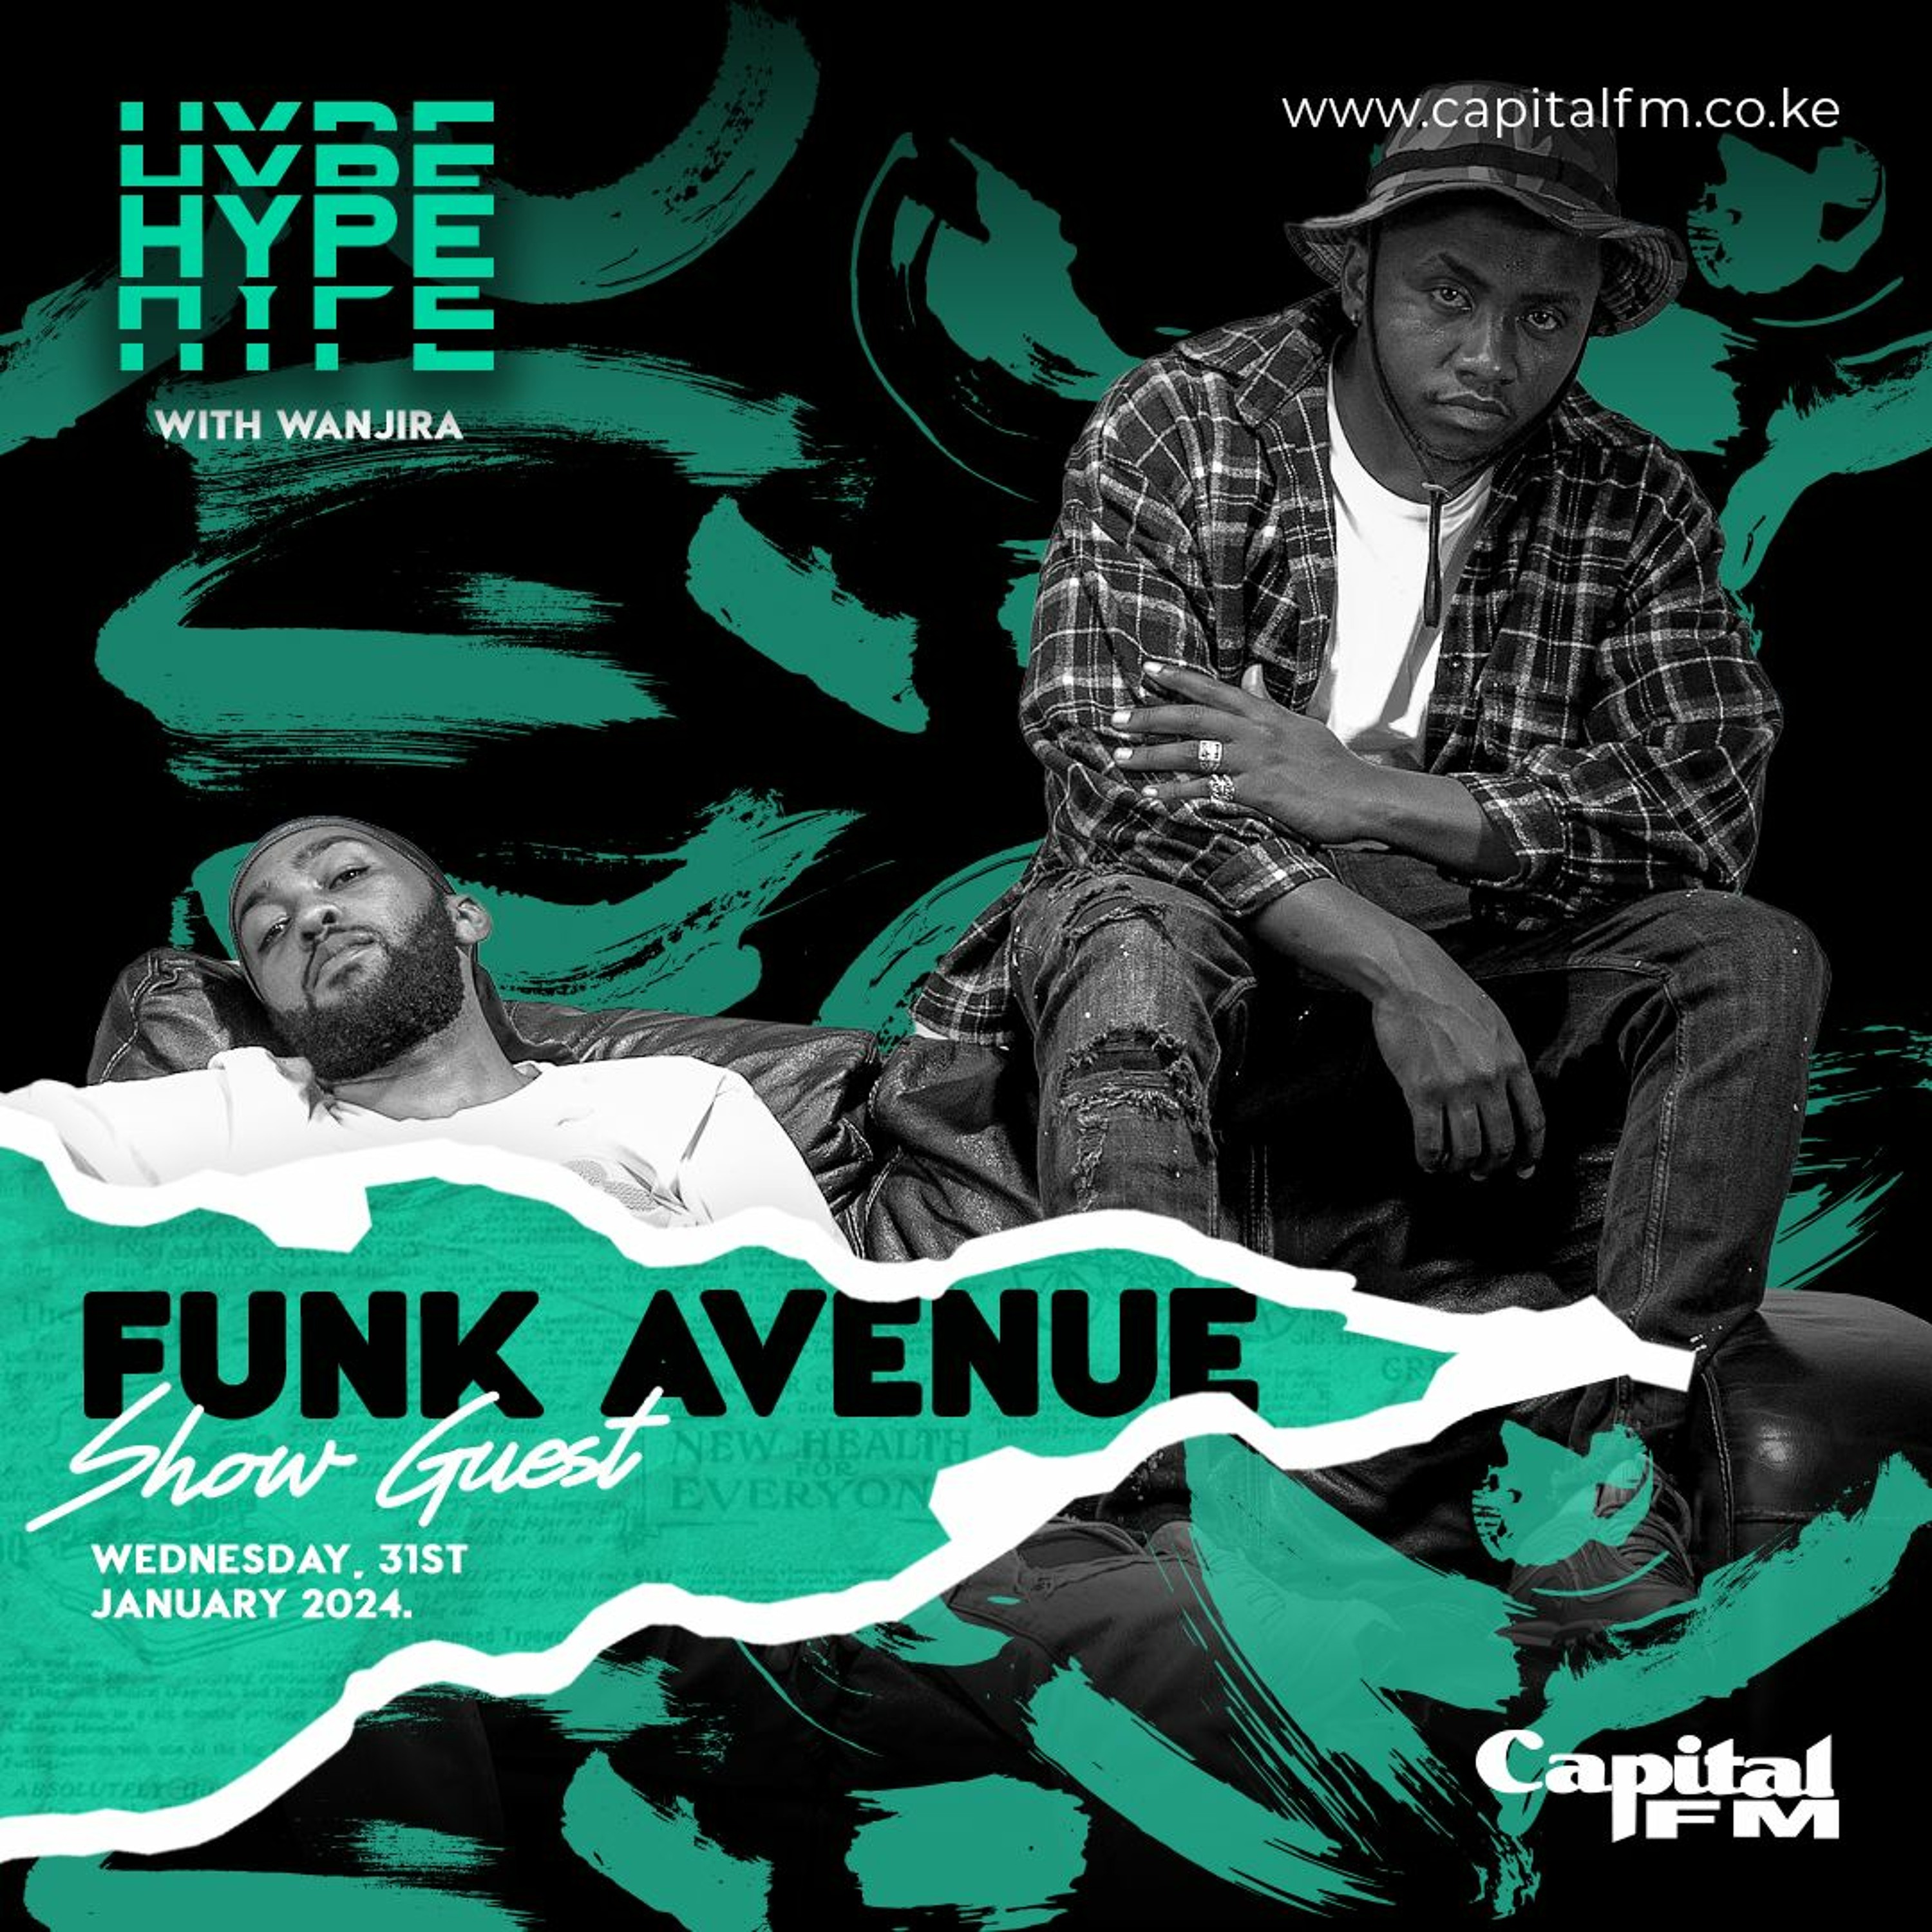 Funk Avenue on their latest project ”Ahora Festejamos” | The Hype